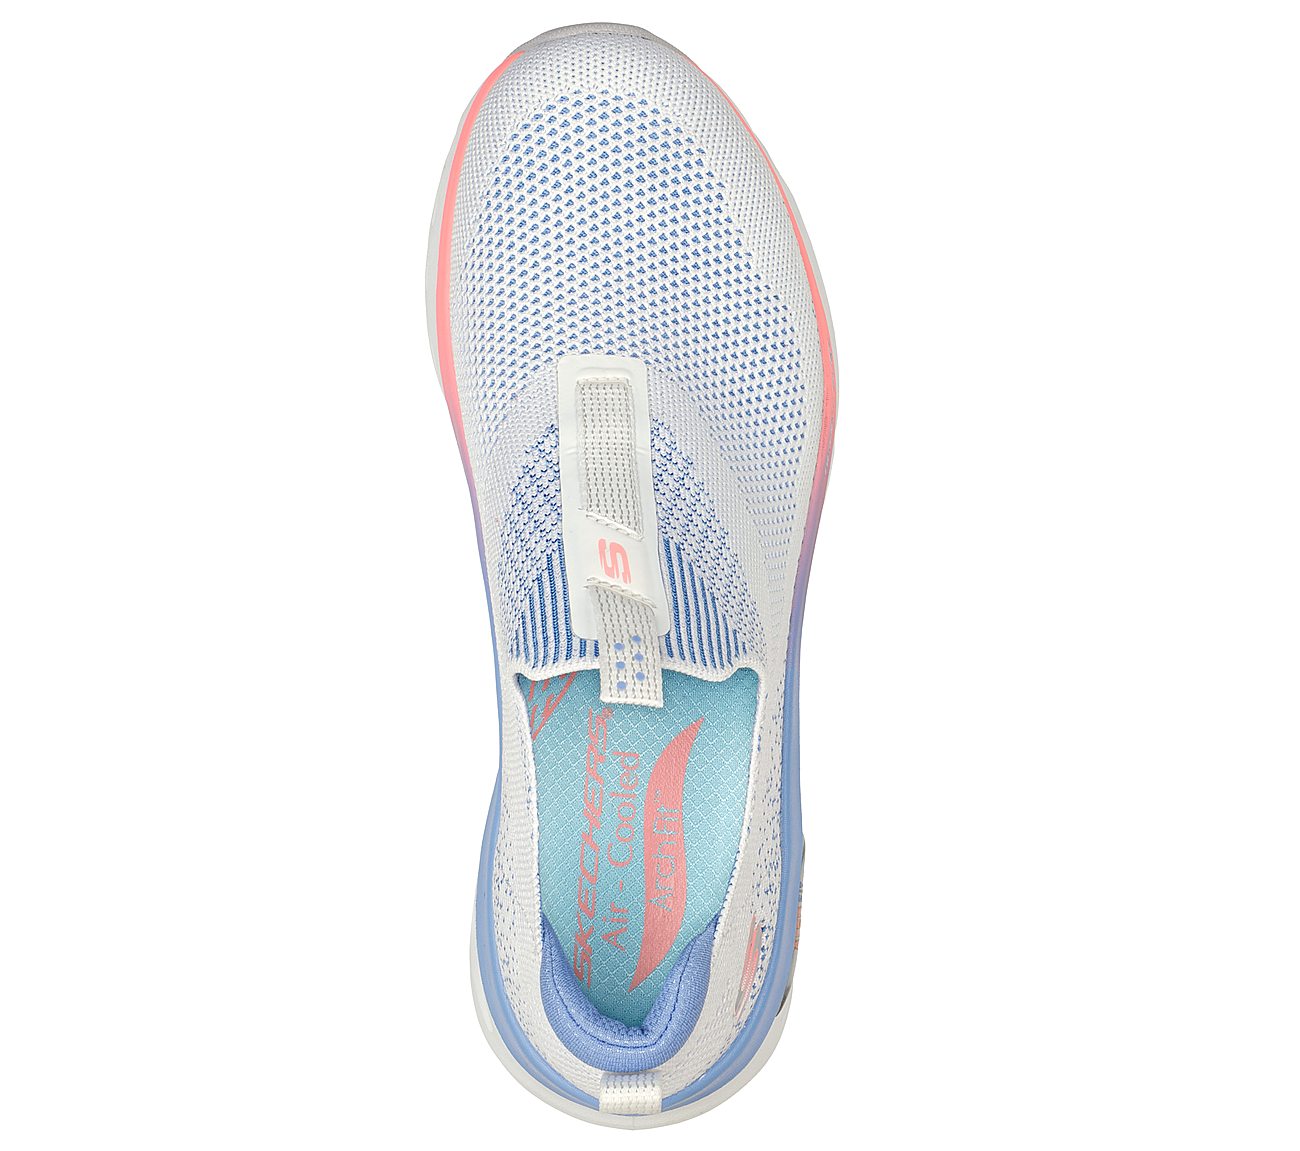 ARCH FIT GLIDE-STEP, WHITE/MULTI Footwear Top View